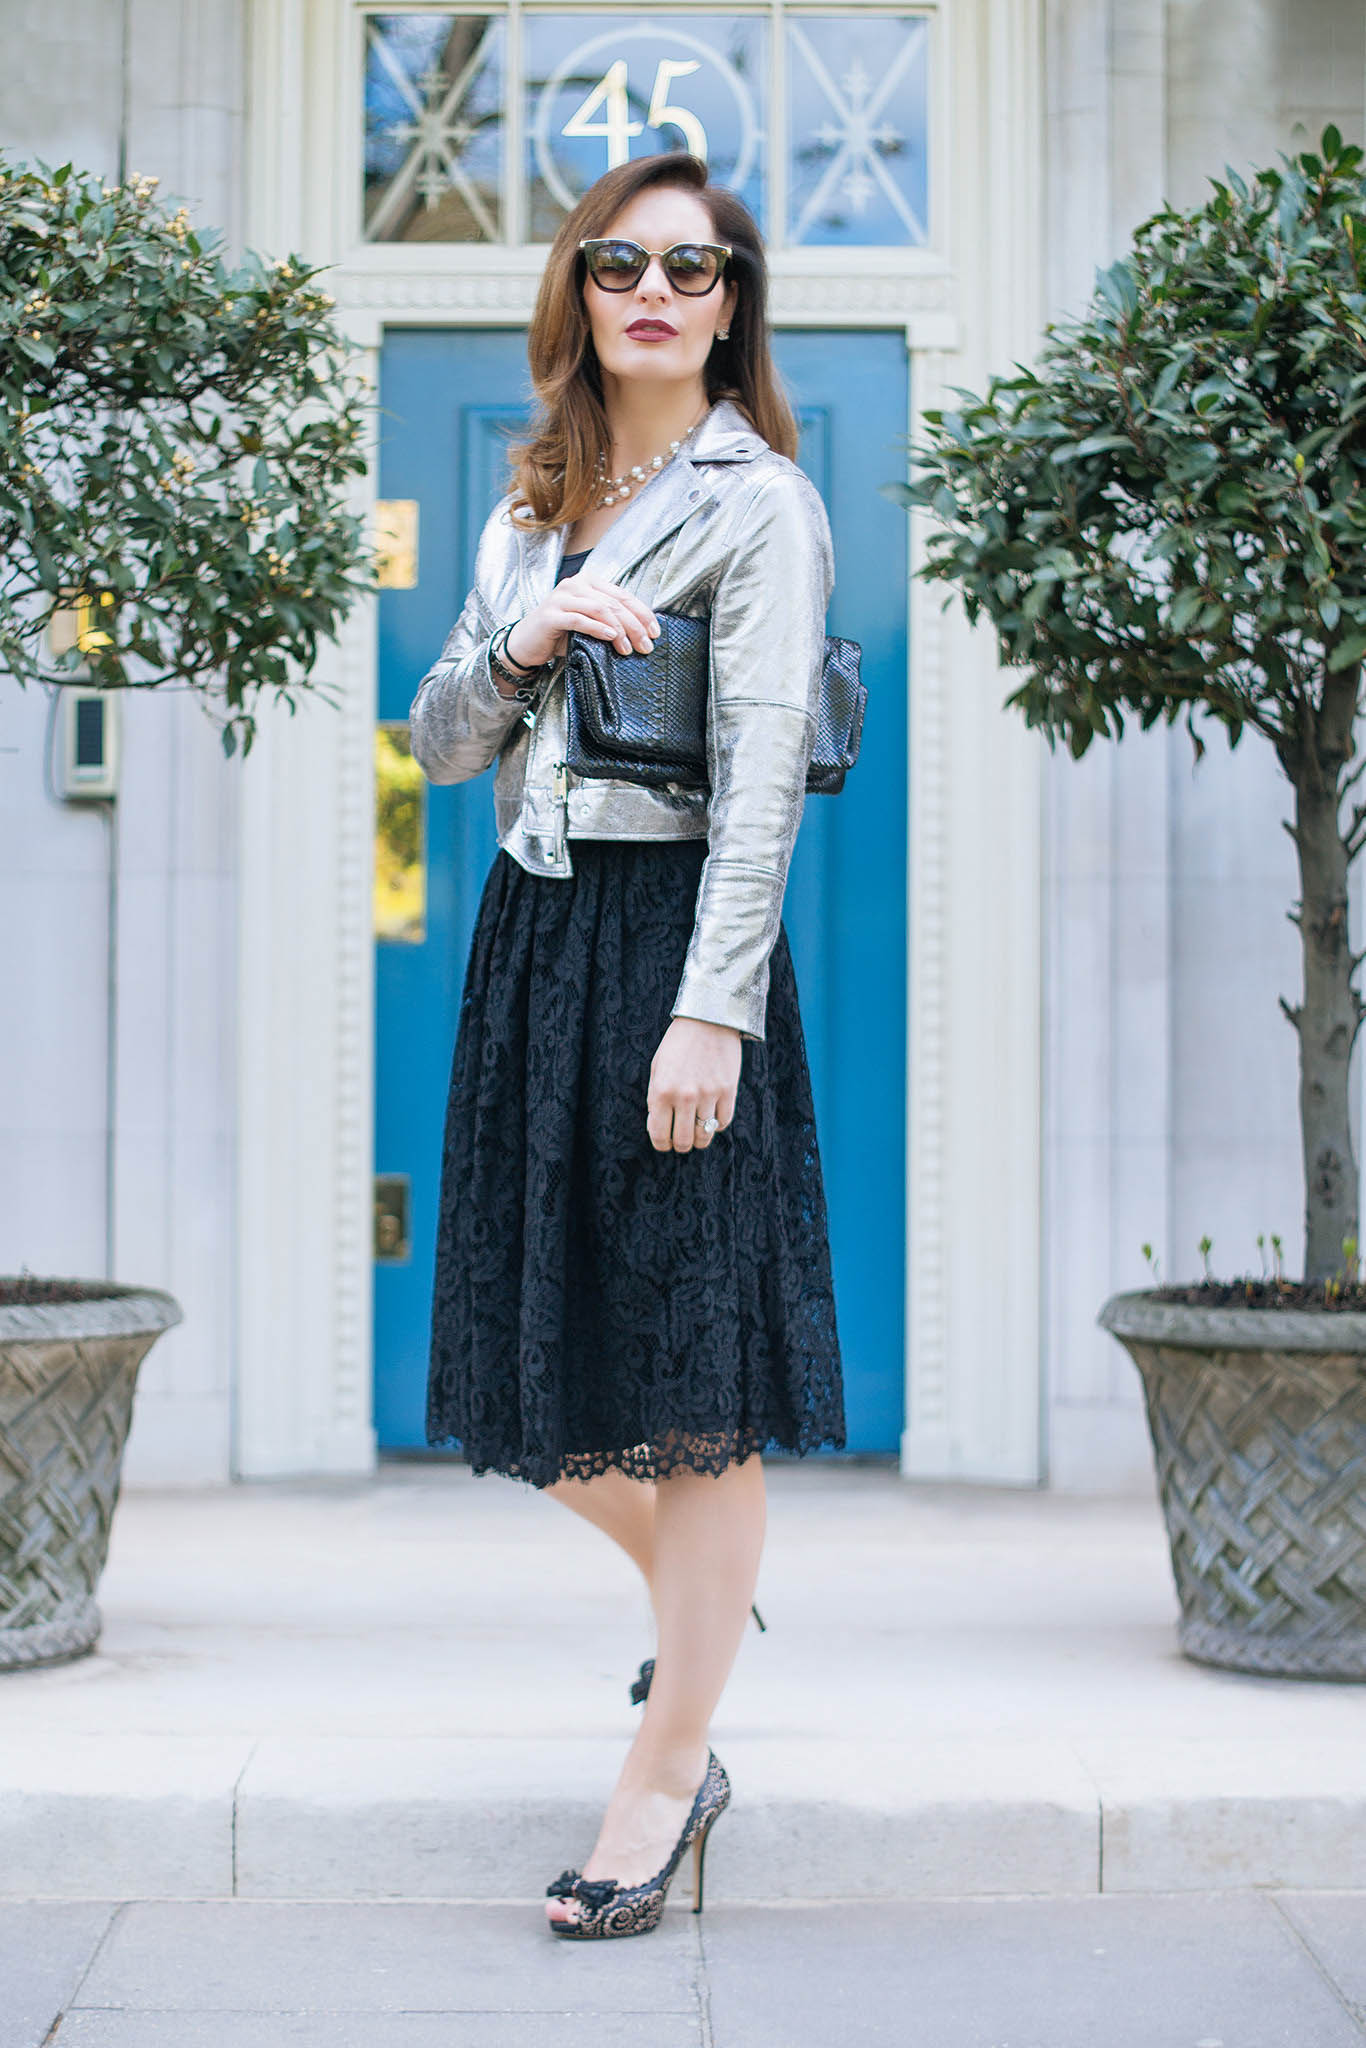 How to wear a midi skirt